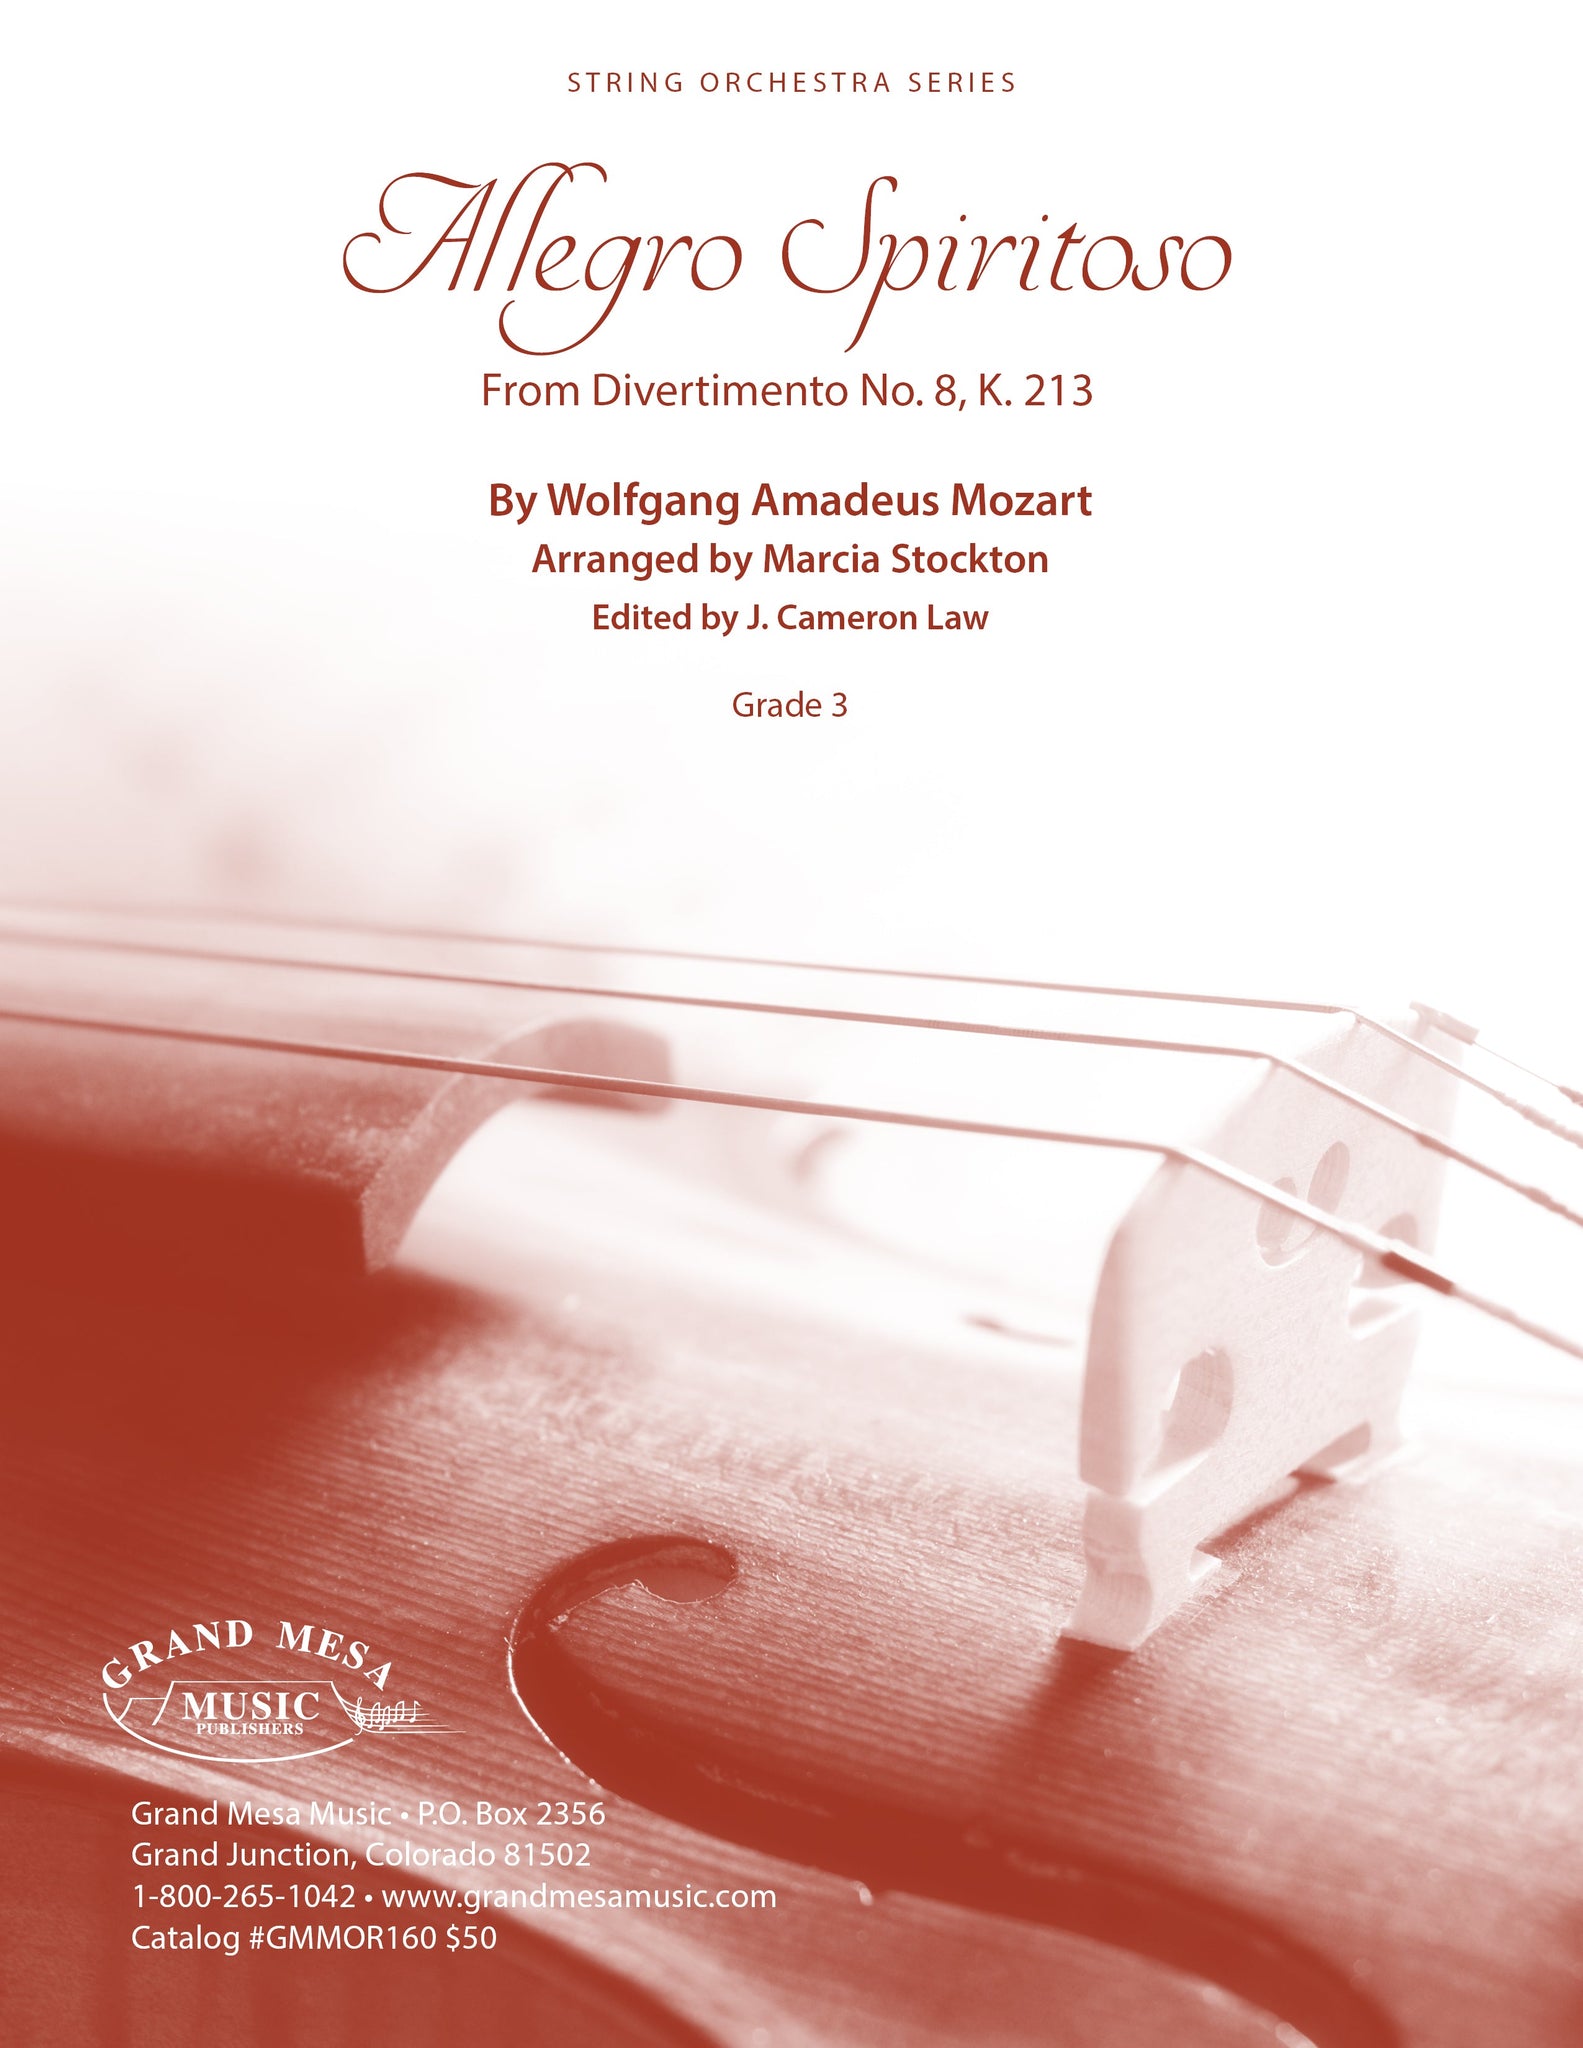 Strings sheet music cover of Allegro Spiritoso, composed by W.A. Mozart, arranged by Marcia Stockton.